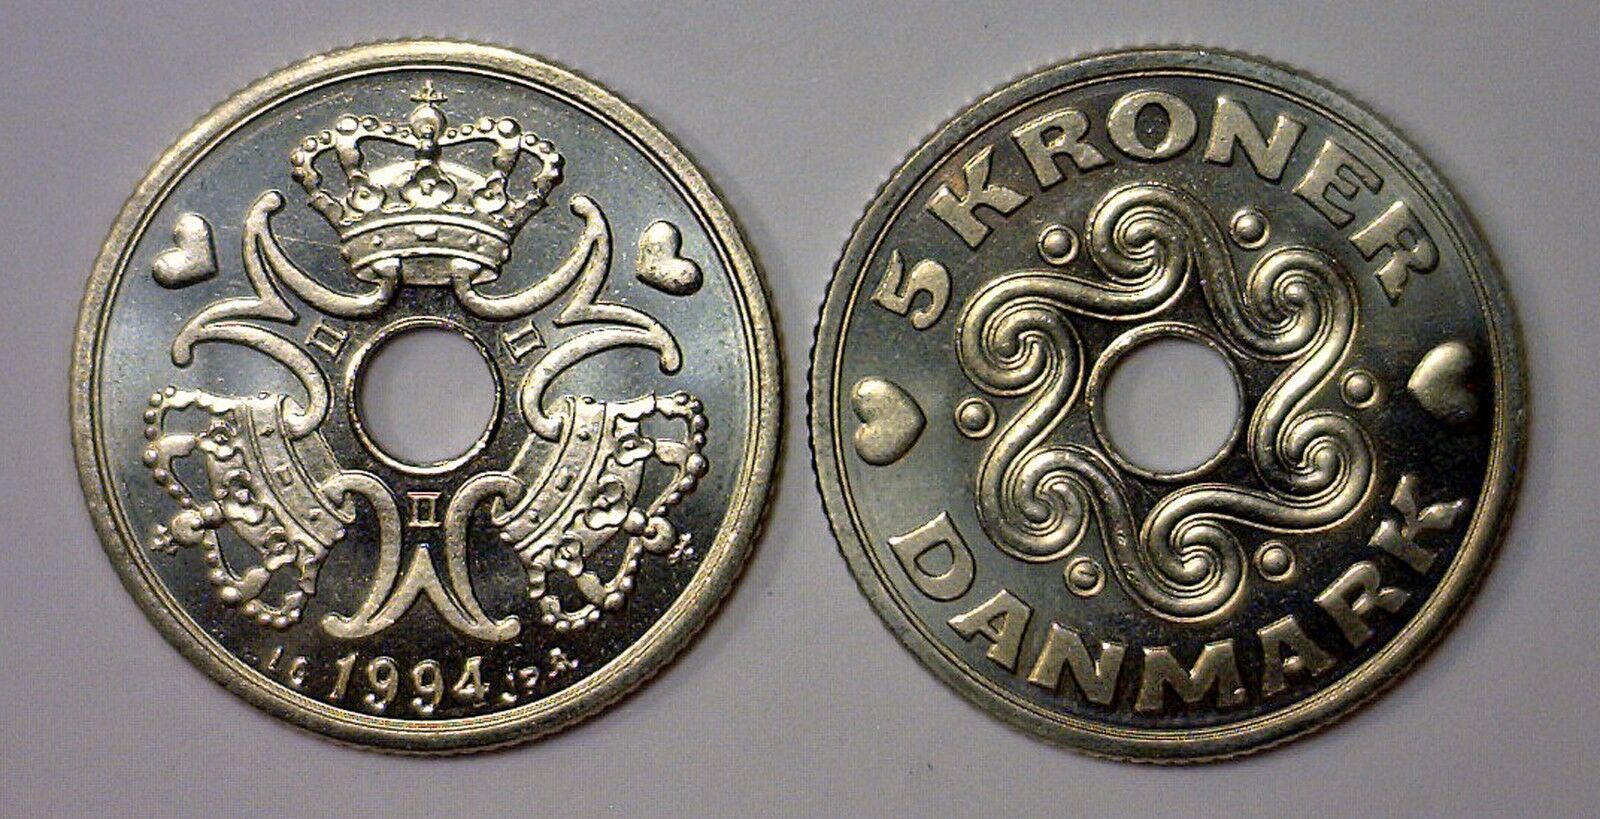 1994 DENMARK 5 KRONER CENTER HOLE 3 CROWN COINS in NEW UNC ROLL of 20 KM 869.1